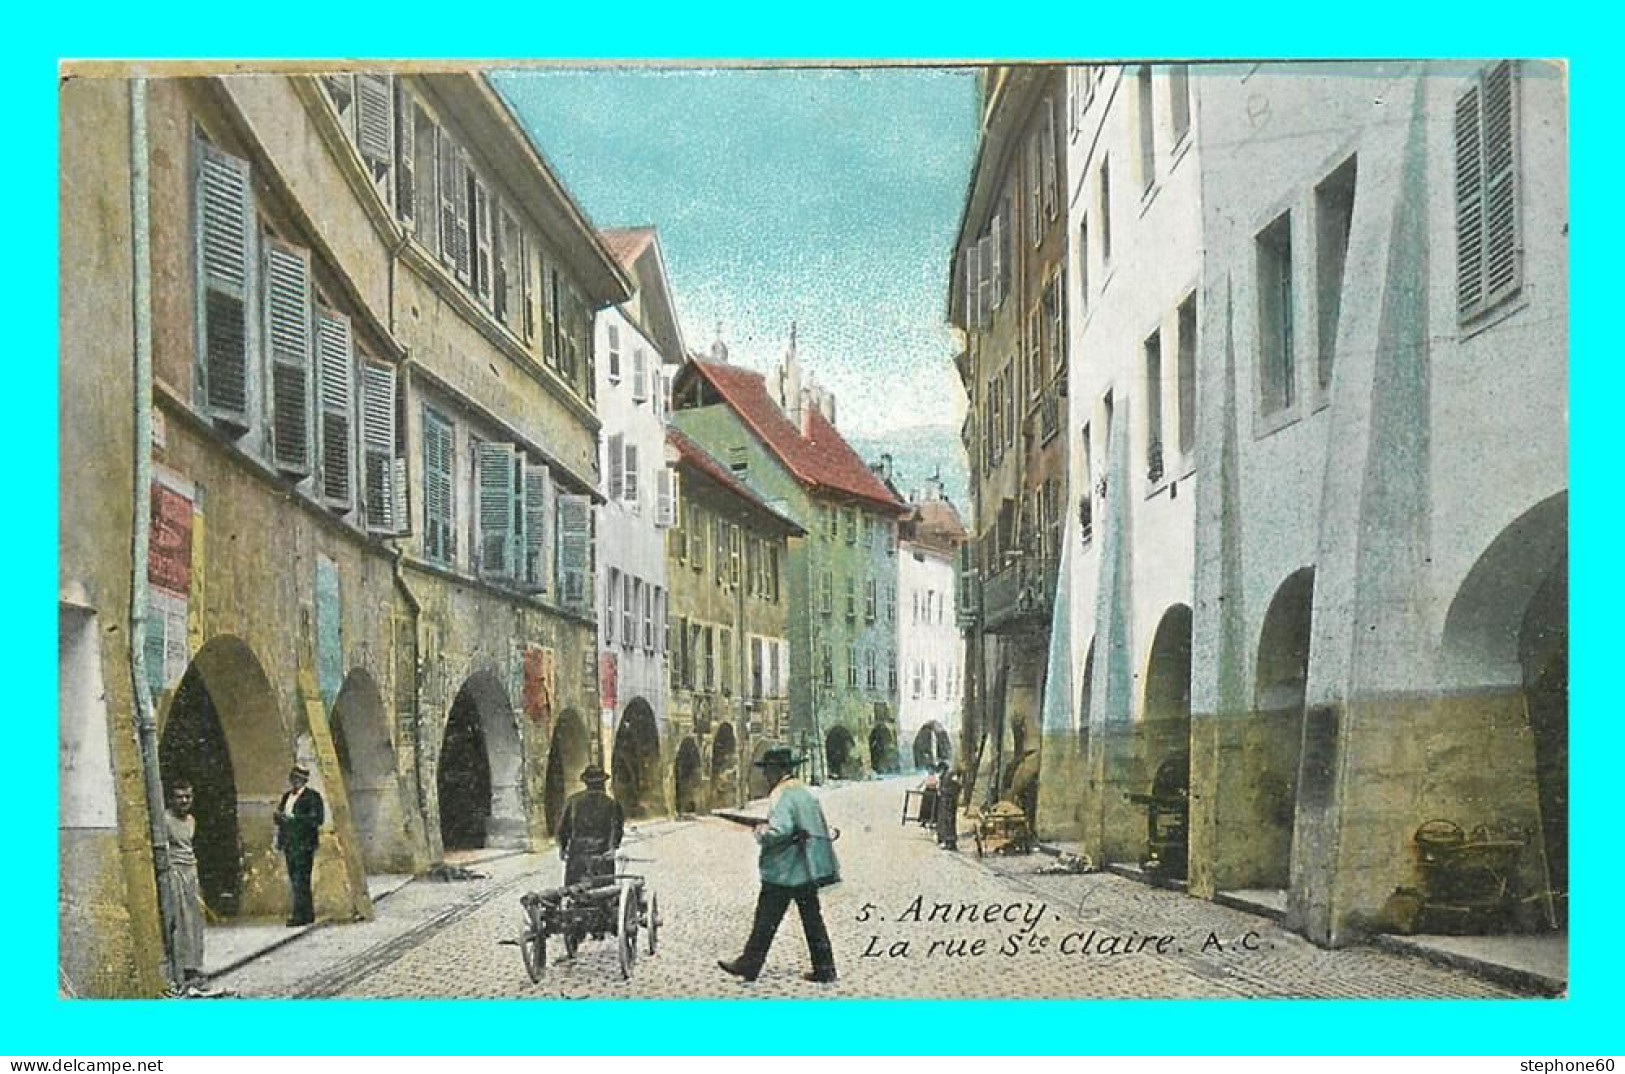 A867 / 295 74 - ANNECY Rue St Claire - Annecy